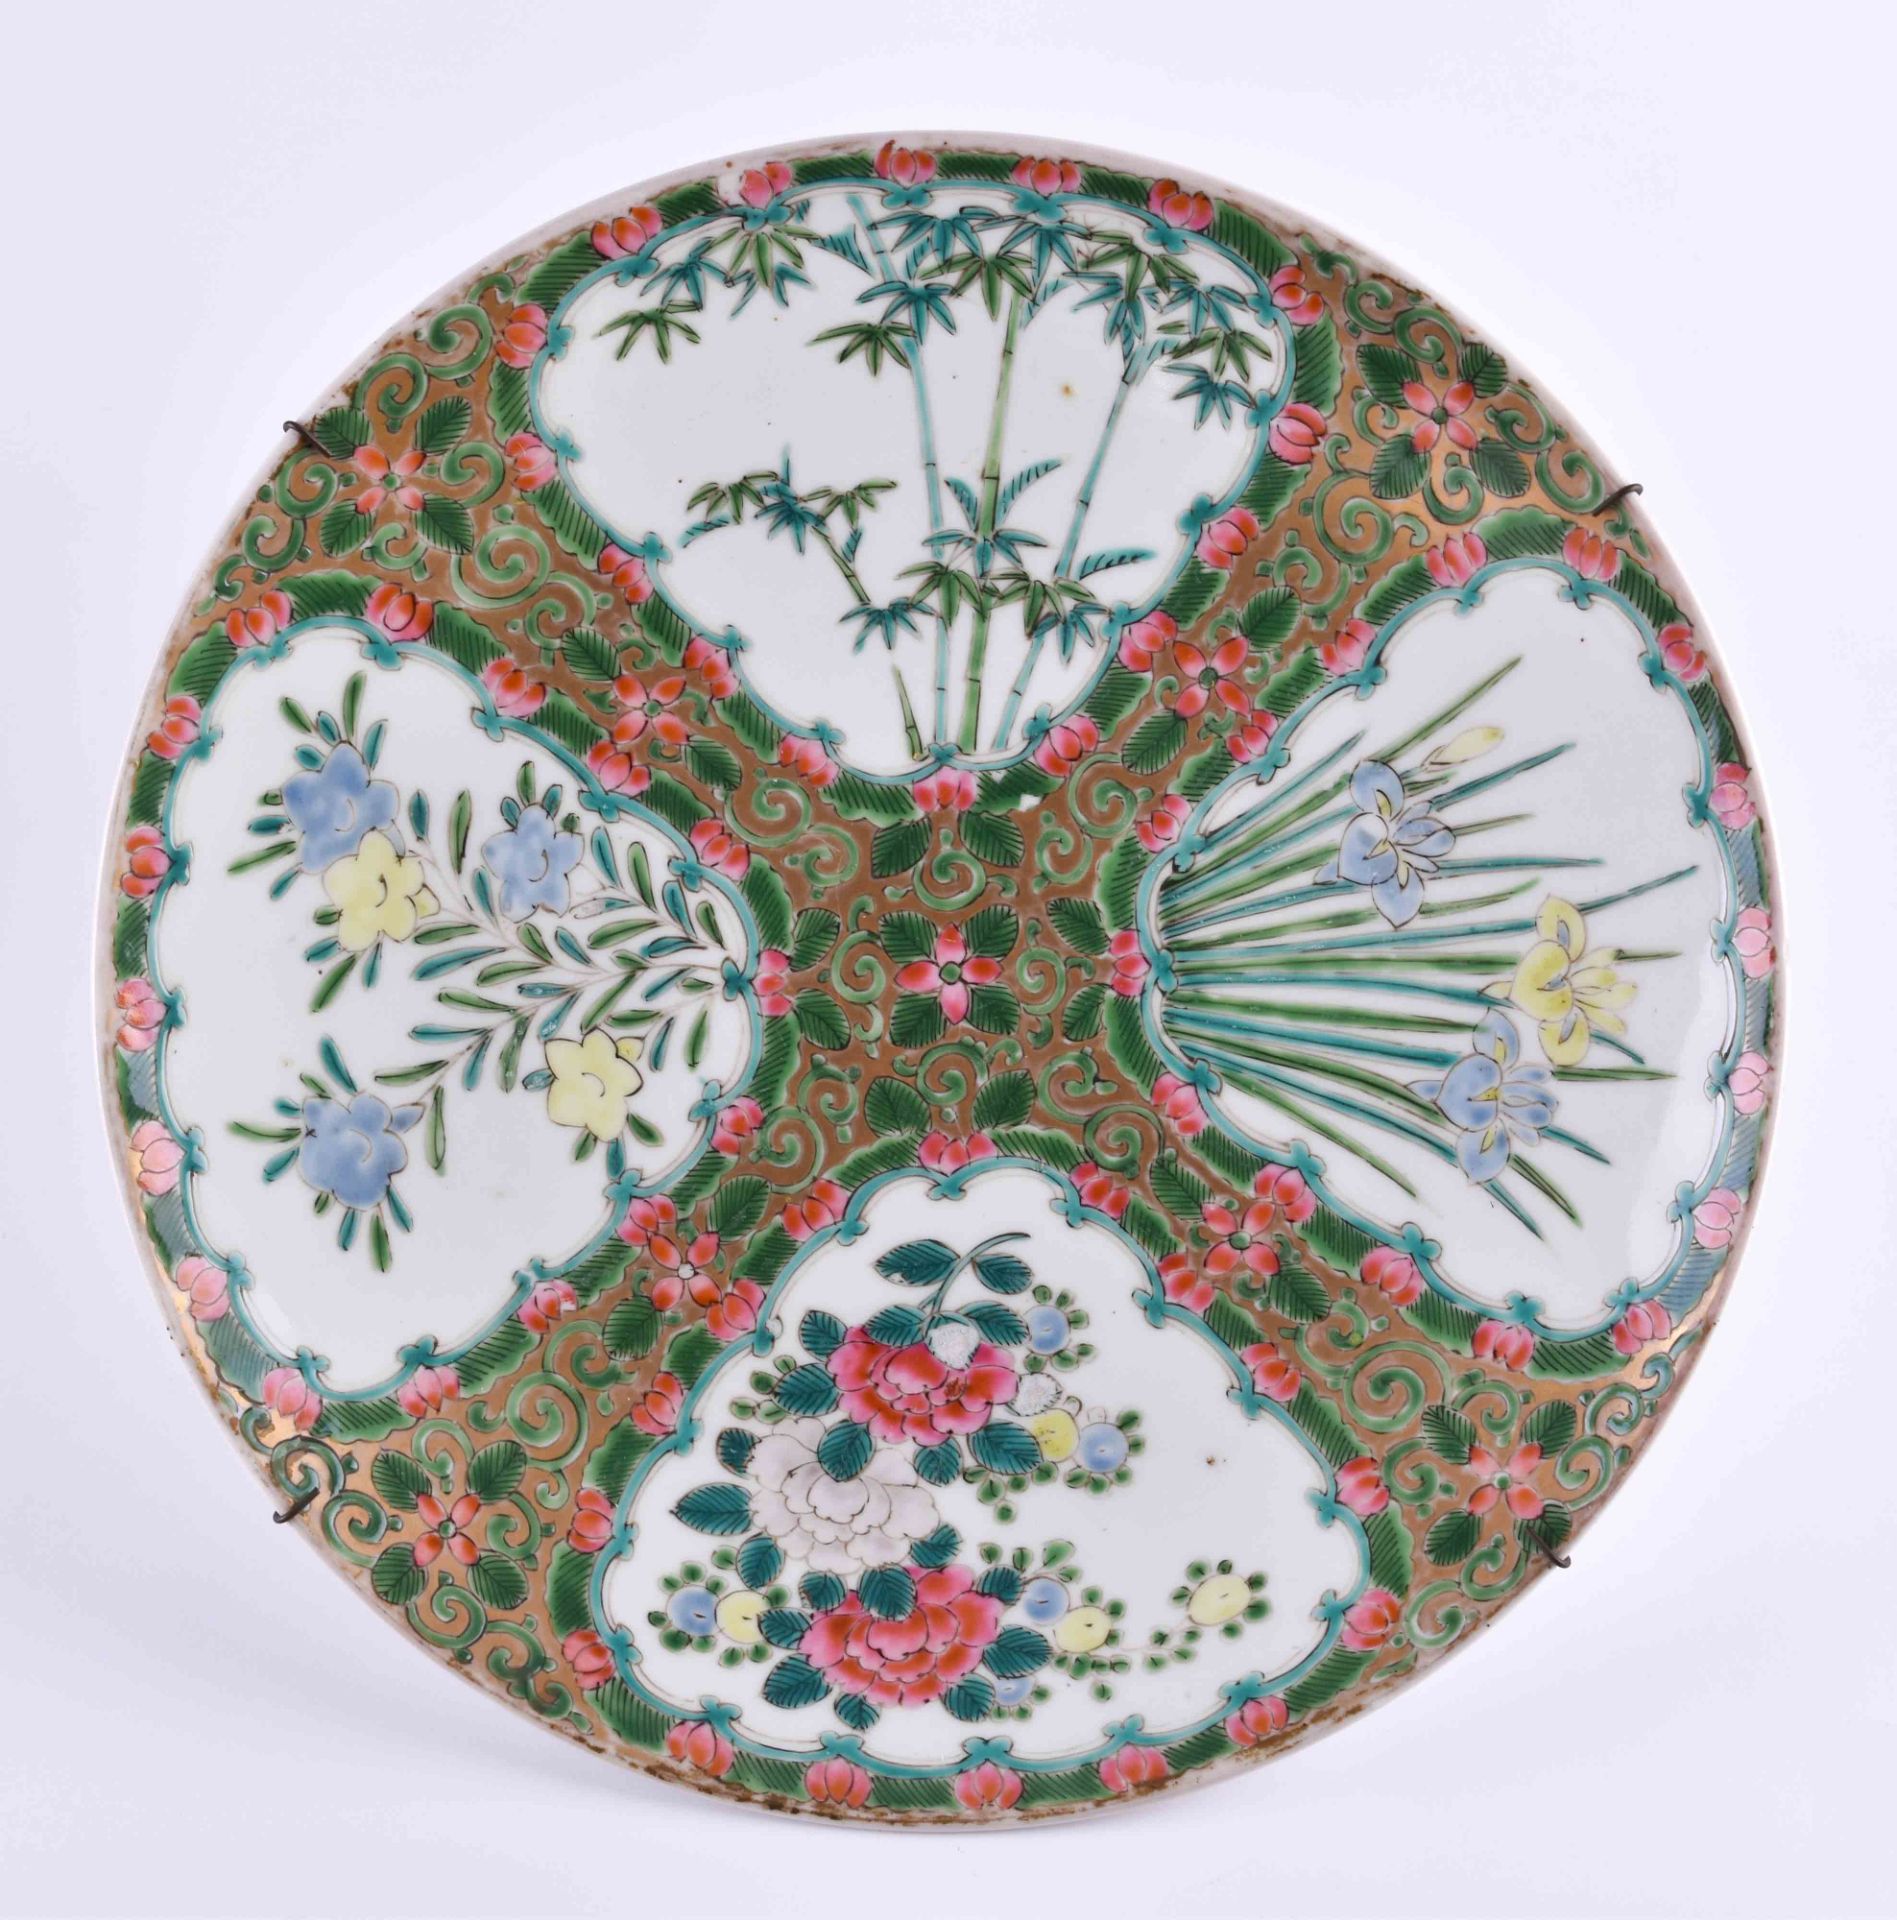 China Qing Dynasty wall platecolored and gold painted with floral decor, under the bottom with